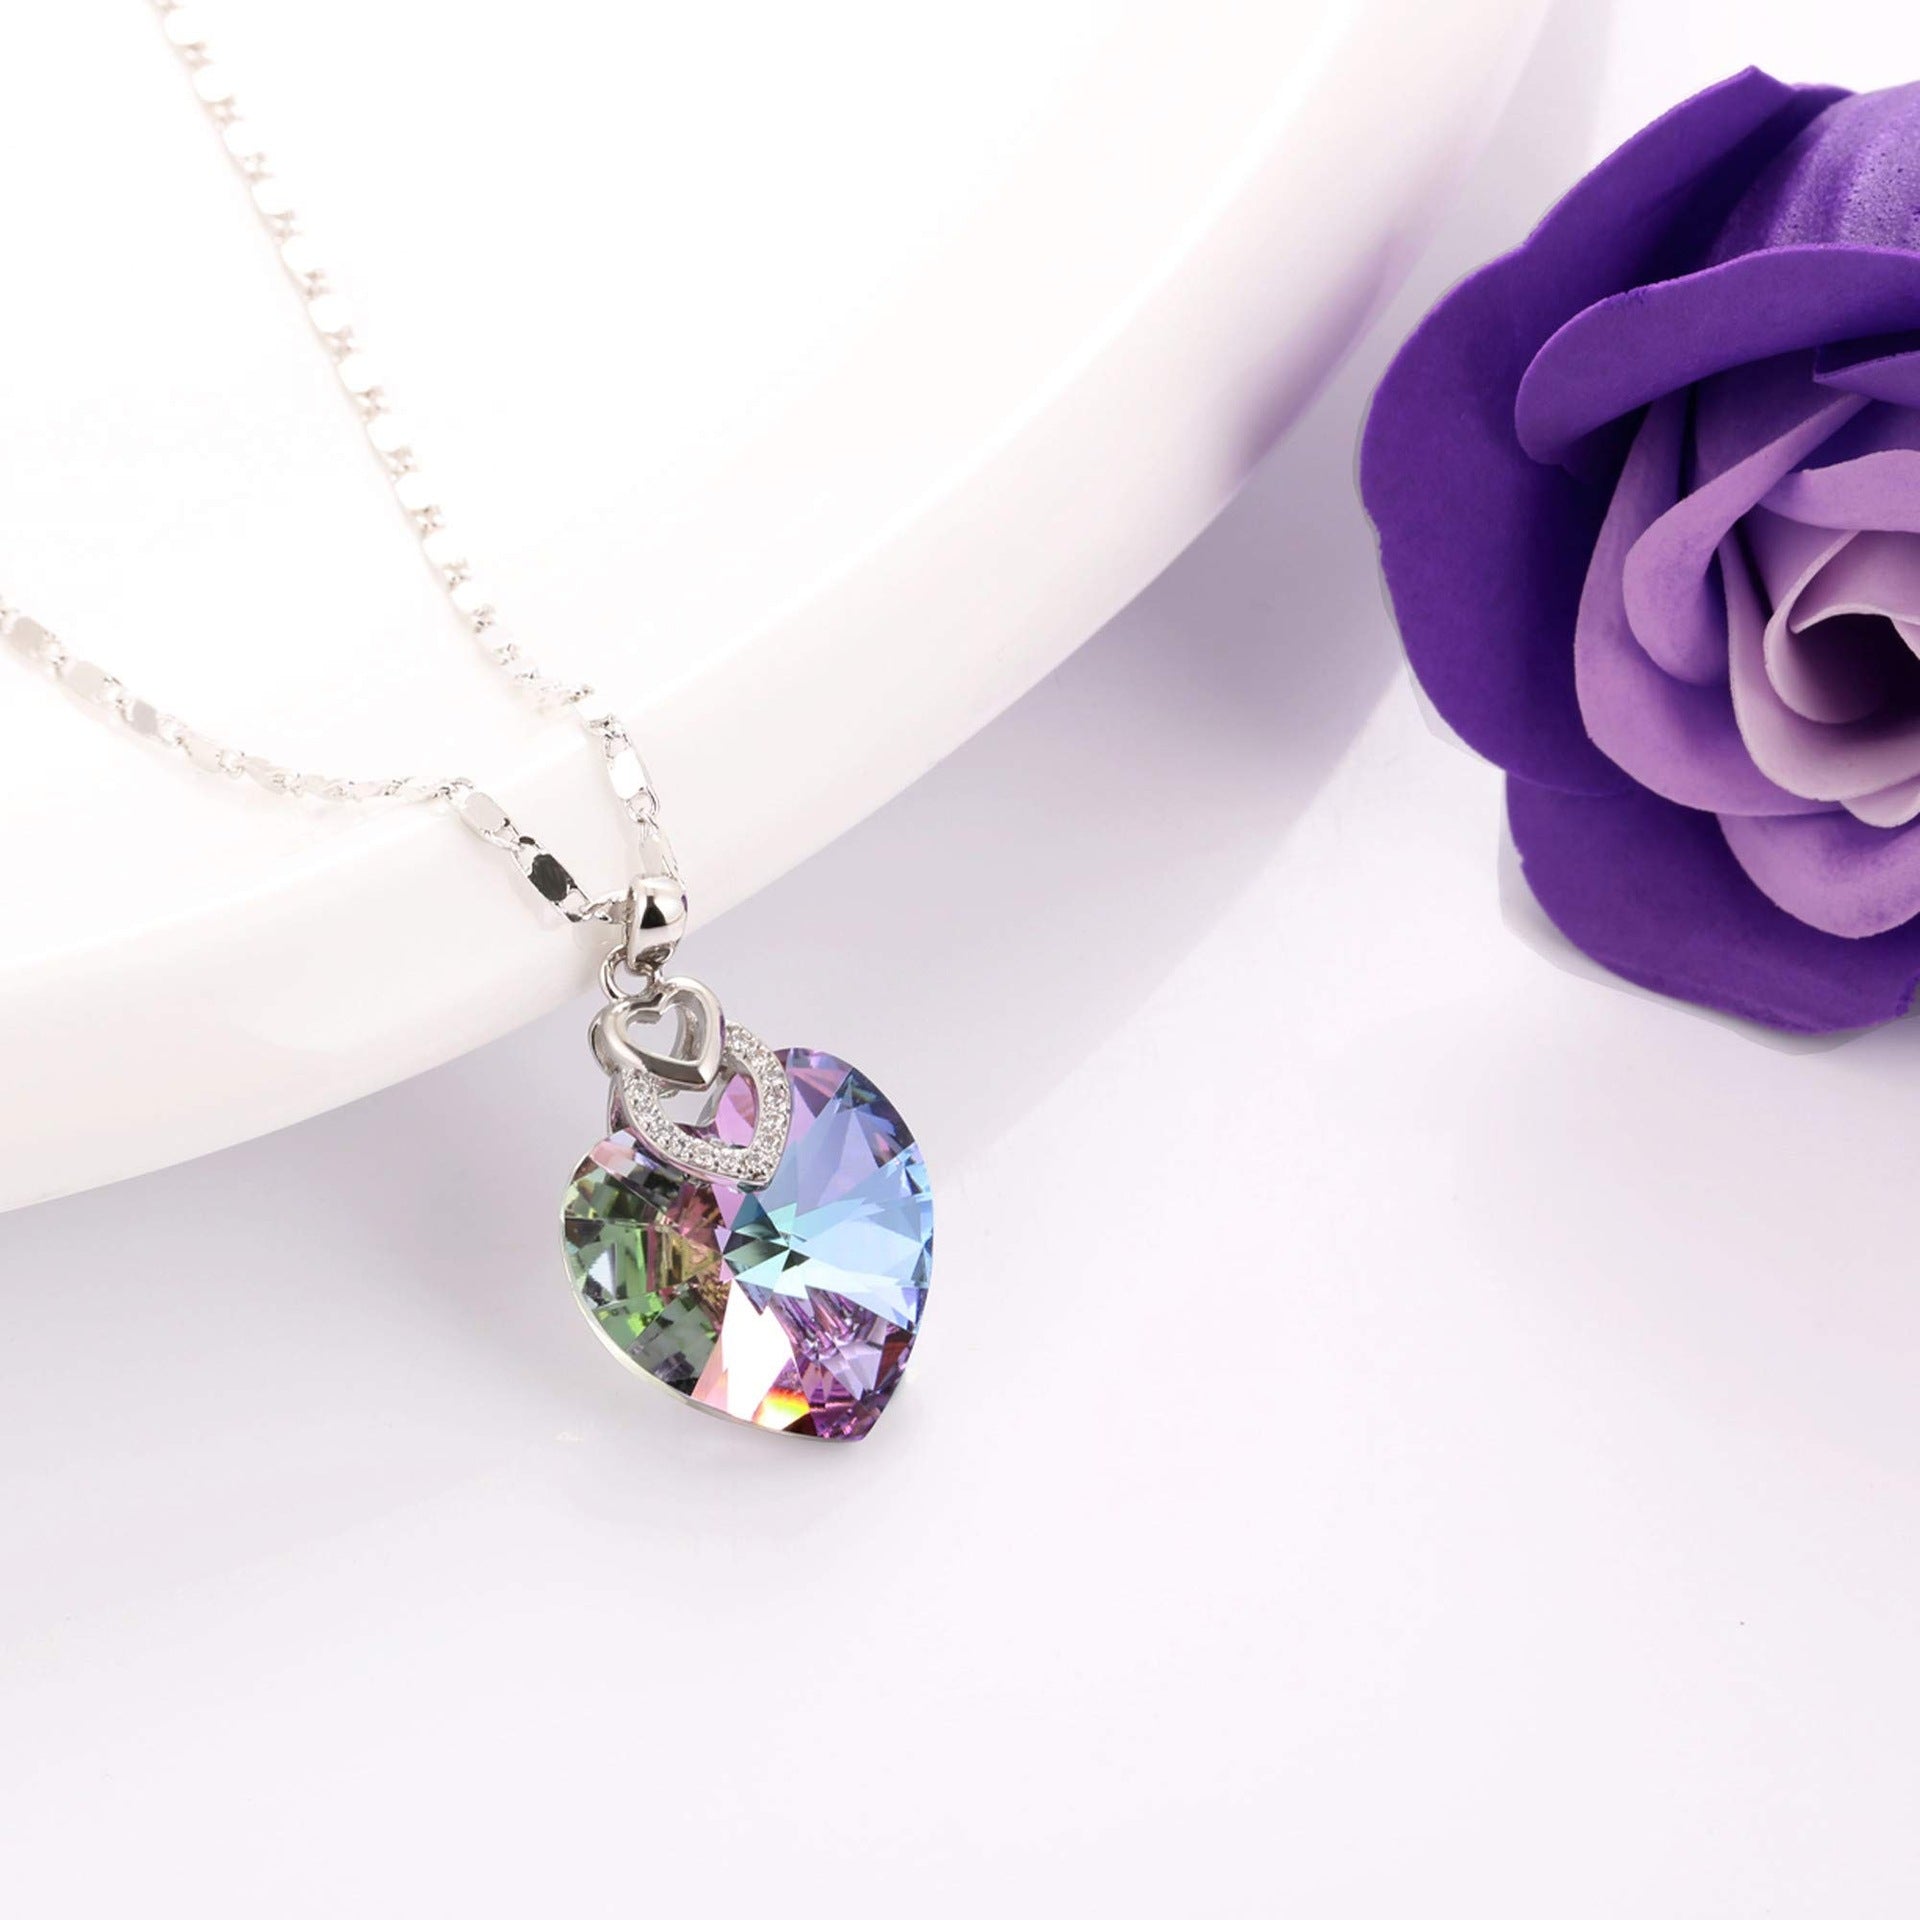 Necklace with a Simple Crystal Pendant for Women’s Fashion